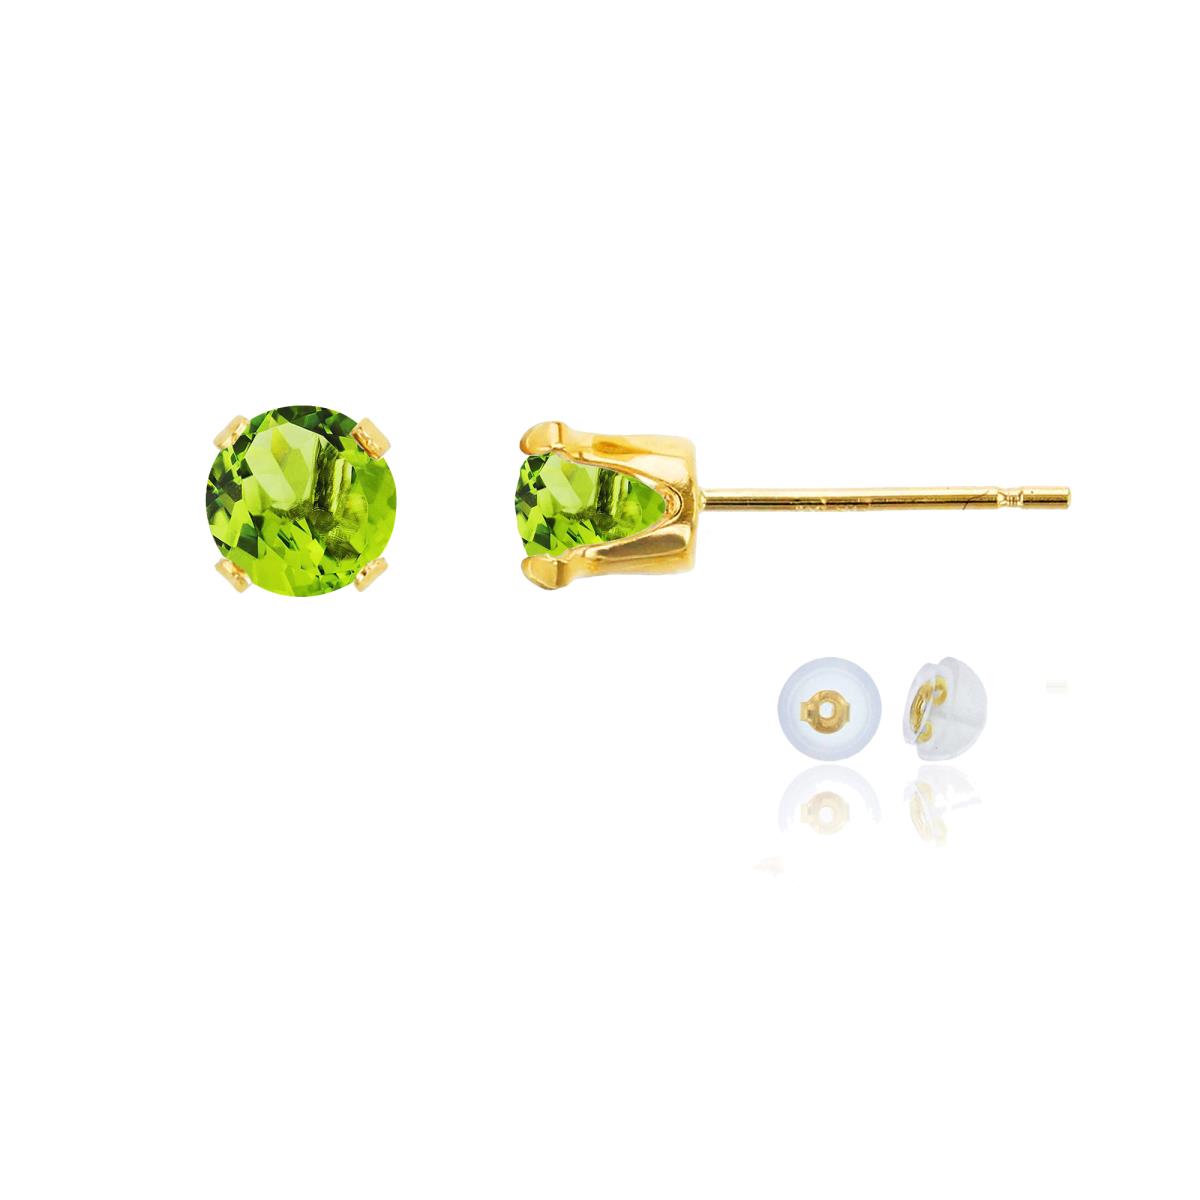 10K Yellow Gold 5mm Round Peridot Stud Earring with Silicone Back